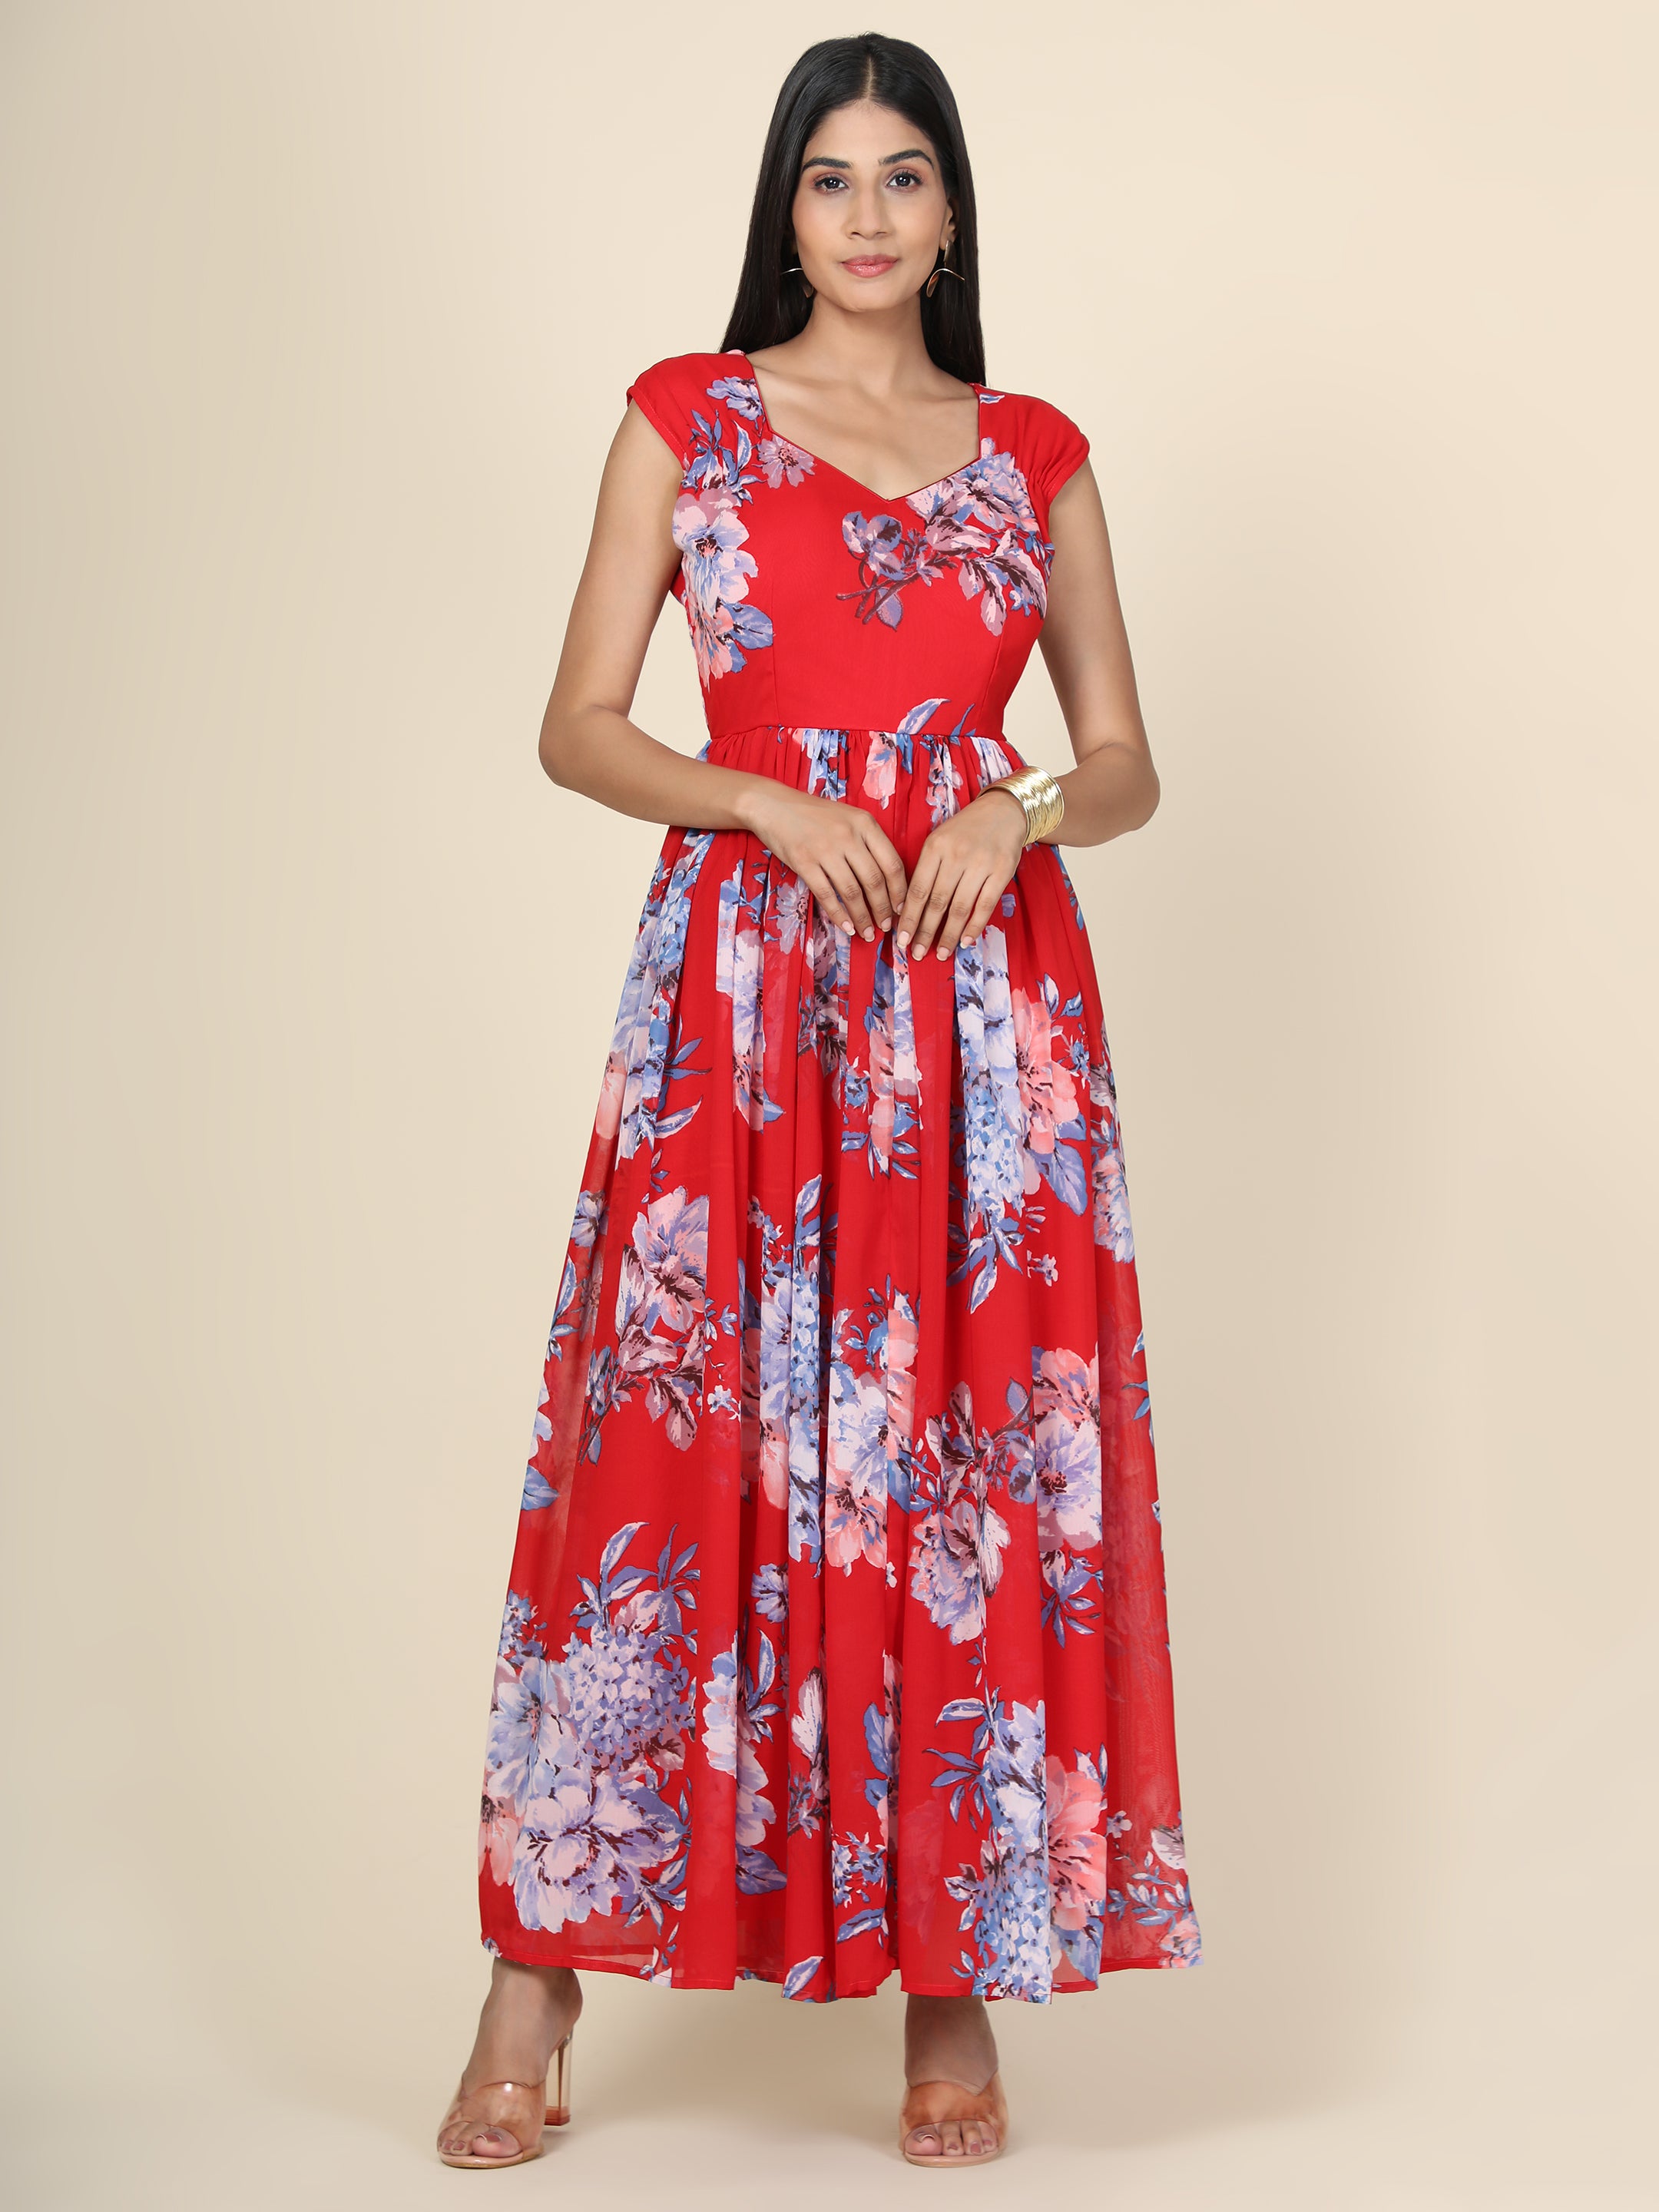 Gowns for Girls | Buy Girls Gowns Online in india - Myntra